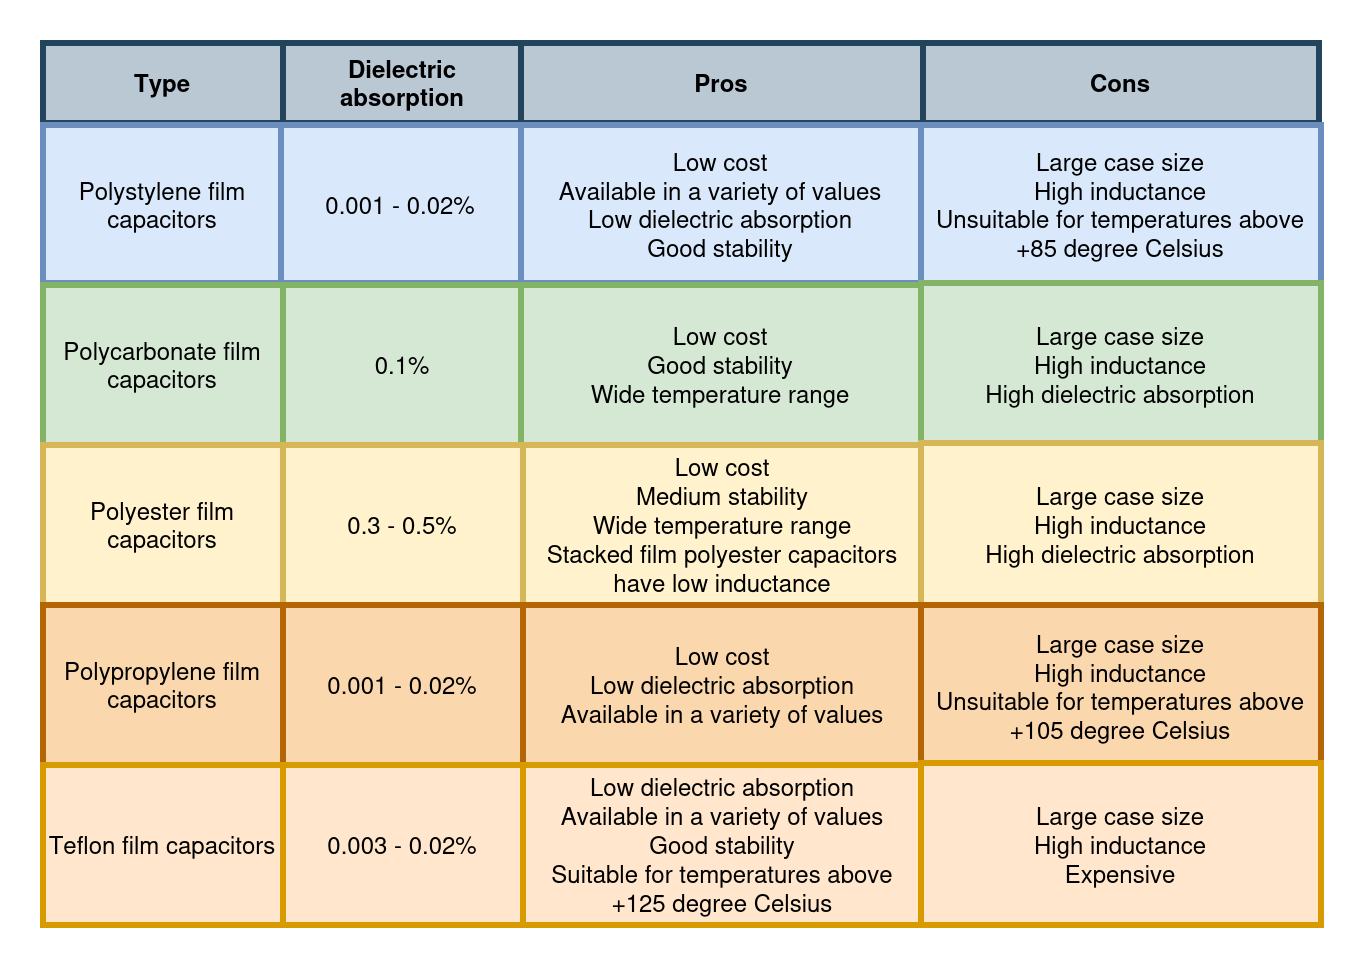 A comparison chart of different types of film capacitors